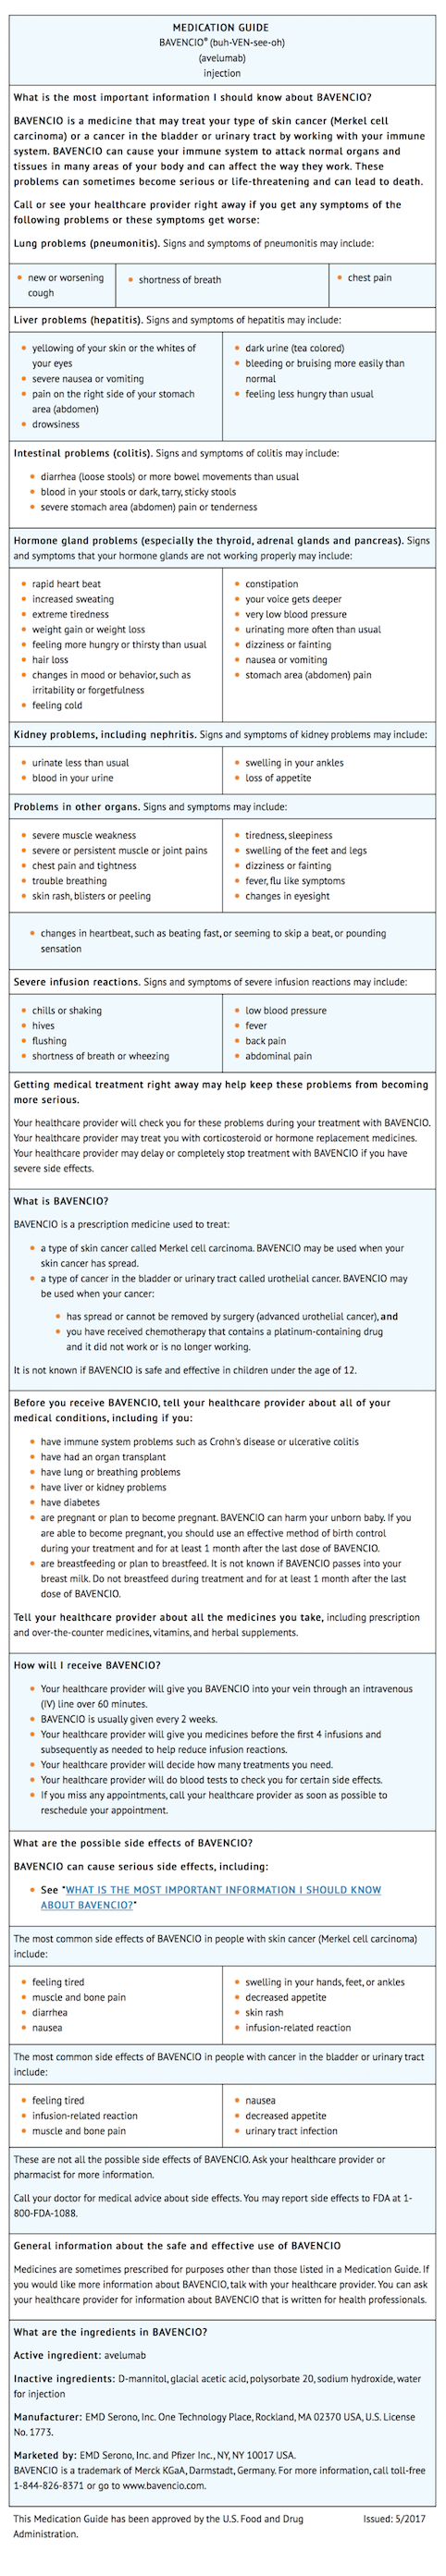 File:Avelumab Patient Counseling Information.png